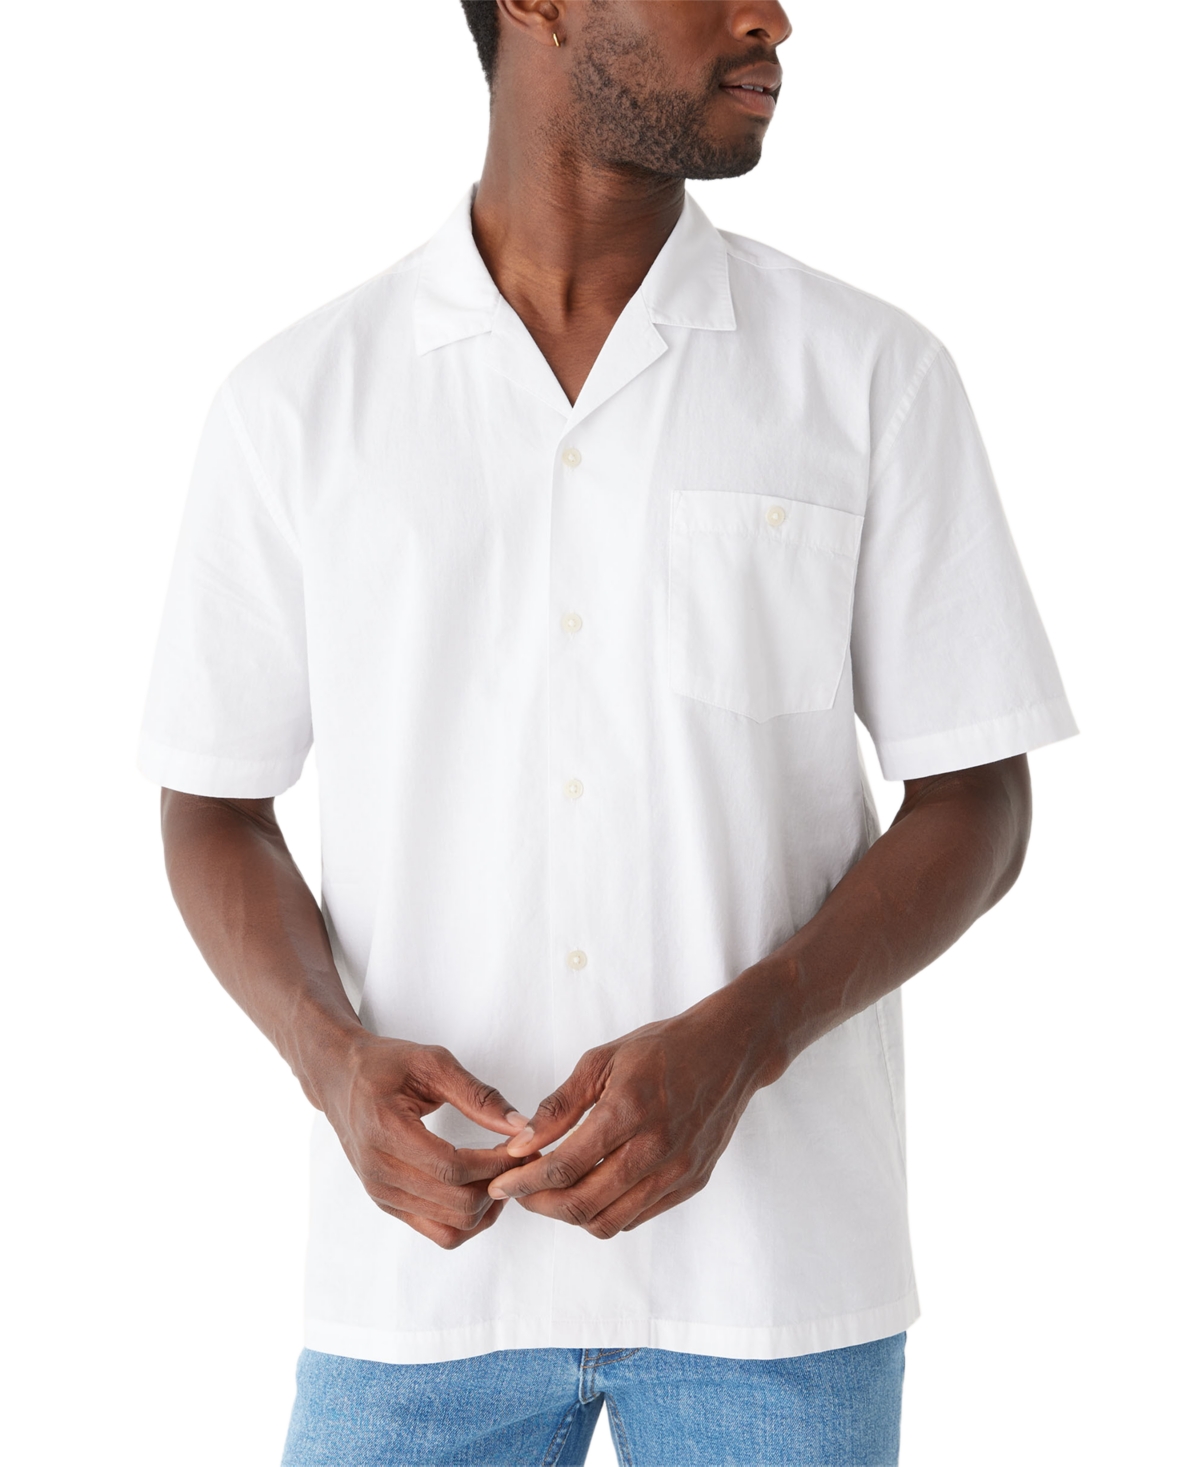 Men's Solid-Color Short-Sleeve Camp Shirt - Bright White